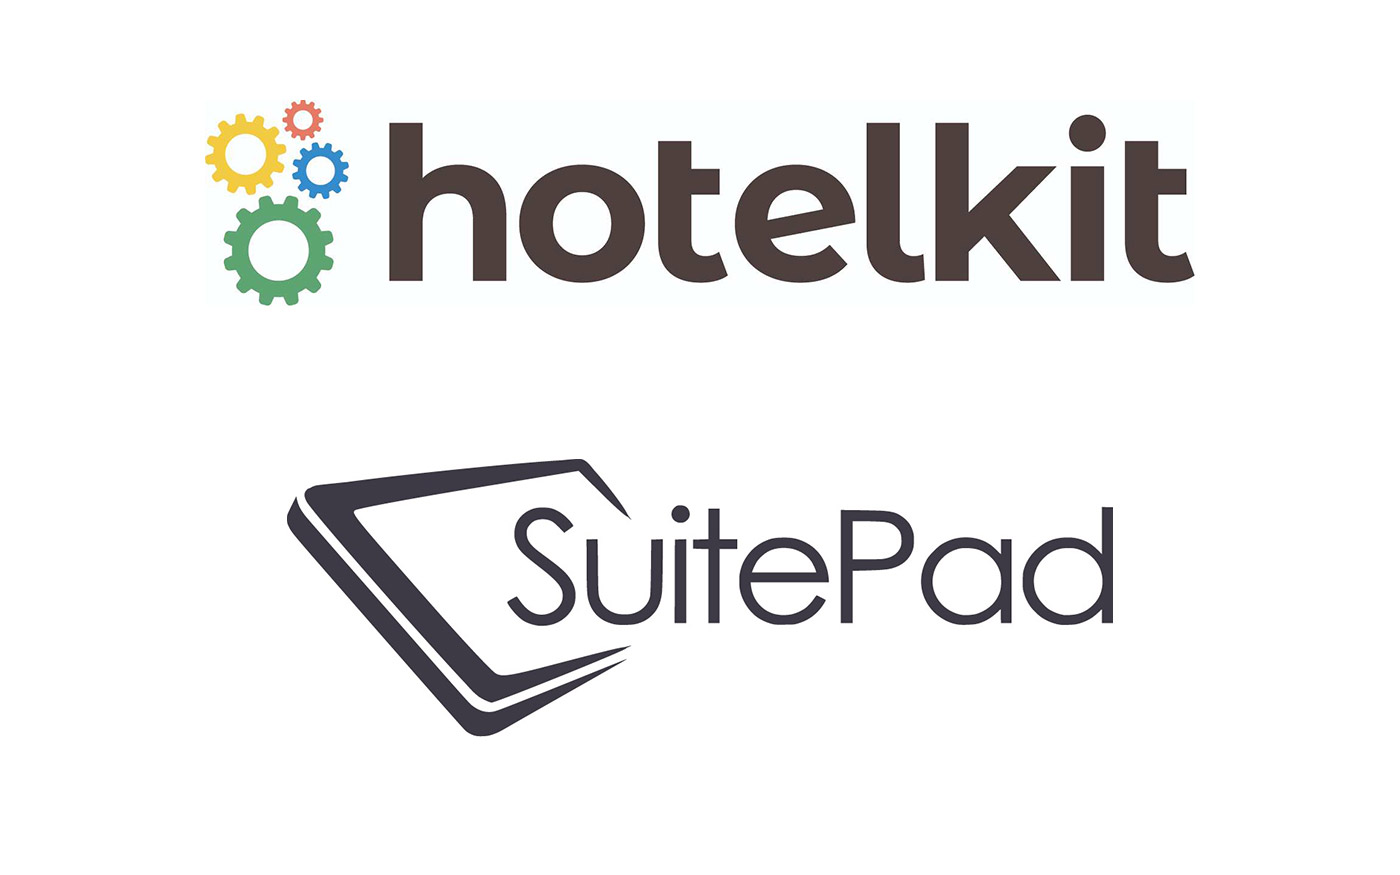 hotelkit and suitepad logos on a plain white background